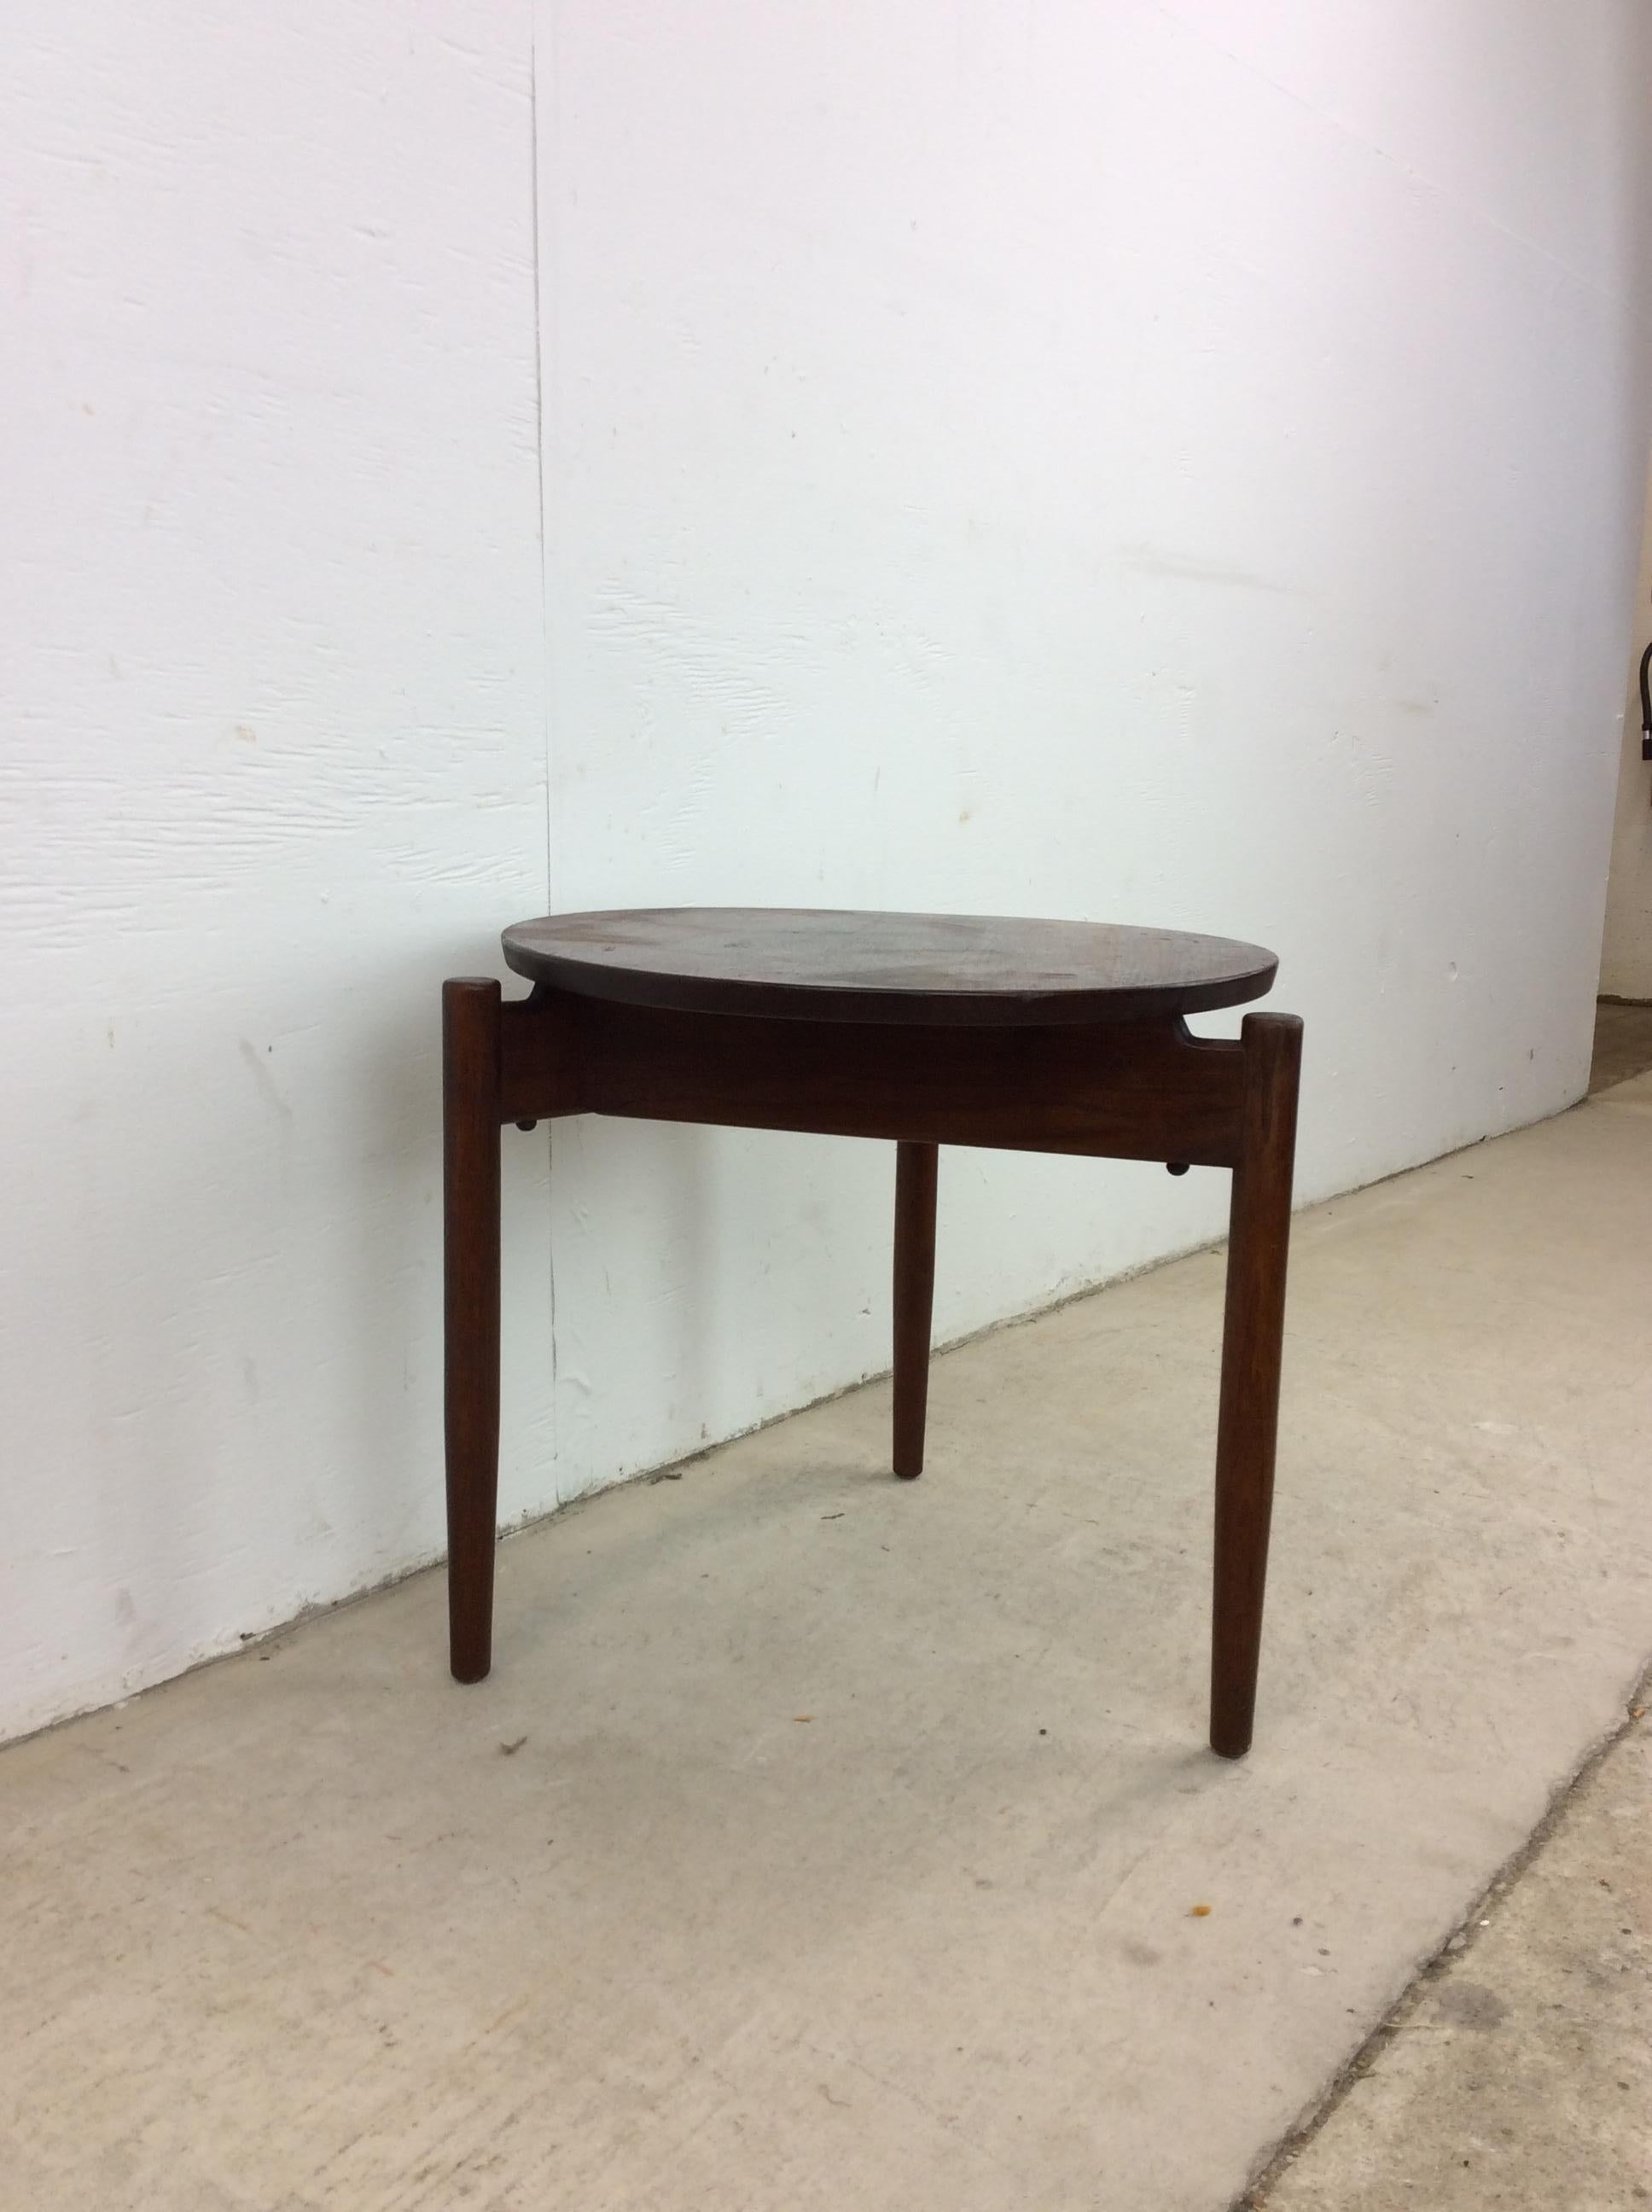 20th Century Danish Modern Round End Table / Stool For Sale